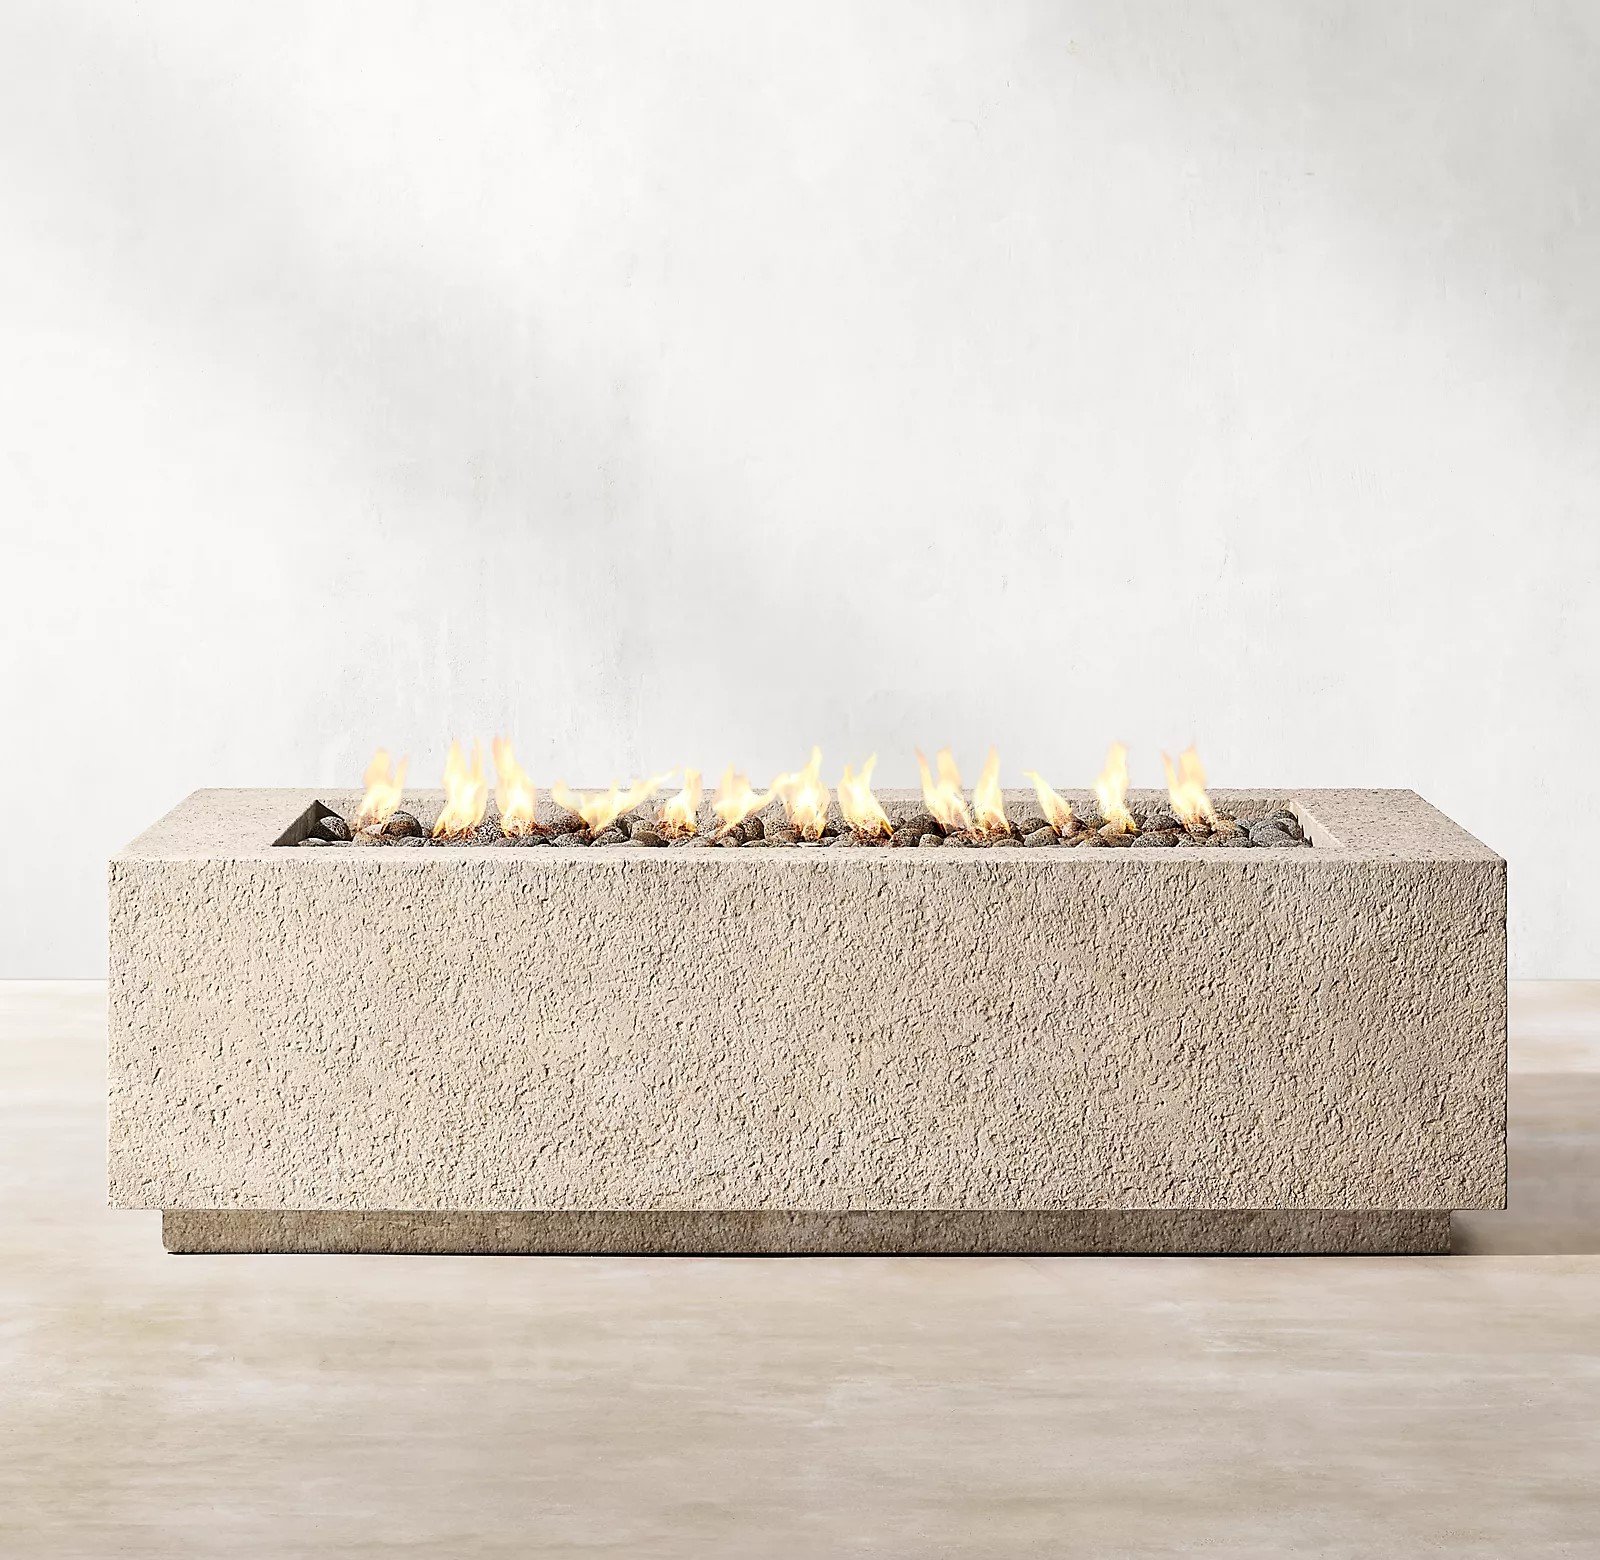 RH’s Yountville Rectangular Fire Table - Pairing minimalist geometry with rustic, hand-hewn texture, the Yountville gas fire pit table offers a bold, elemental presence outdoors. Masterfully crafted of concrete composite for the look of weathered stone with natural lava rock, it is a durable, lighter-weight alternative to pure concrete or stone, and is rated at 65,000 BTUs.SHOP NOW >